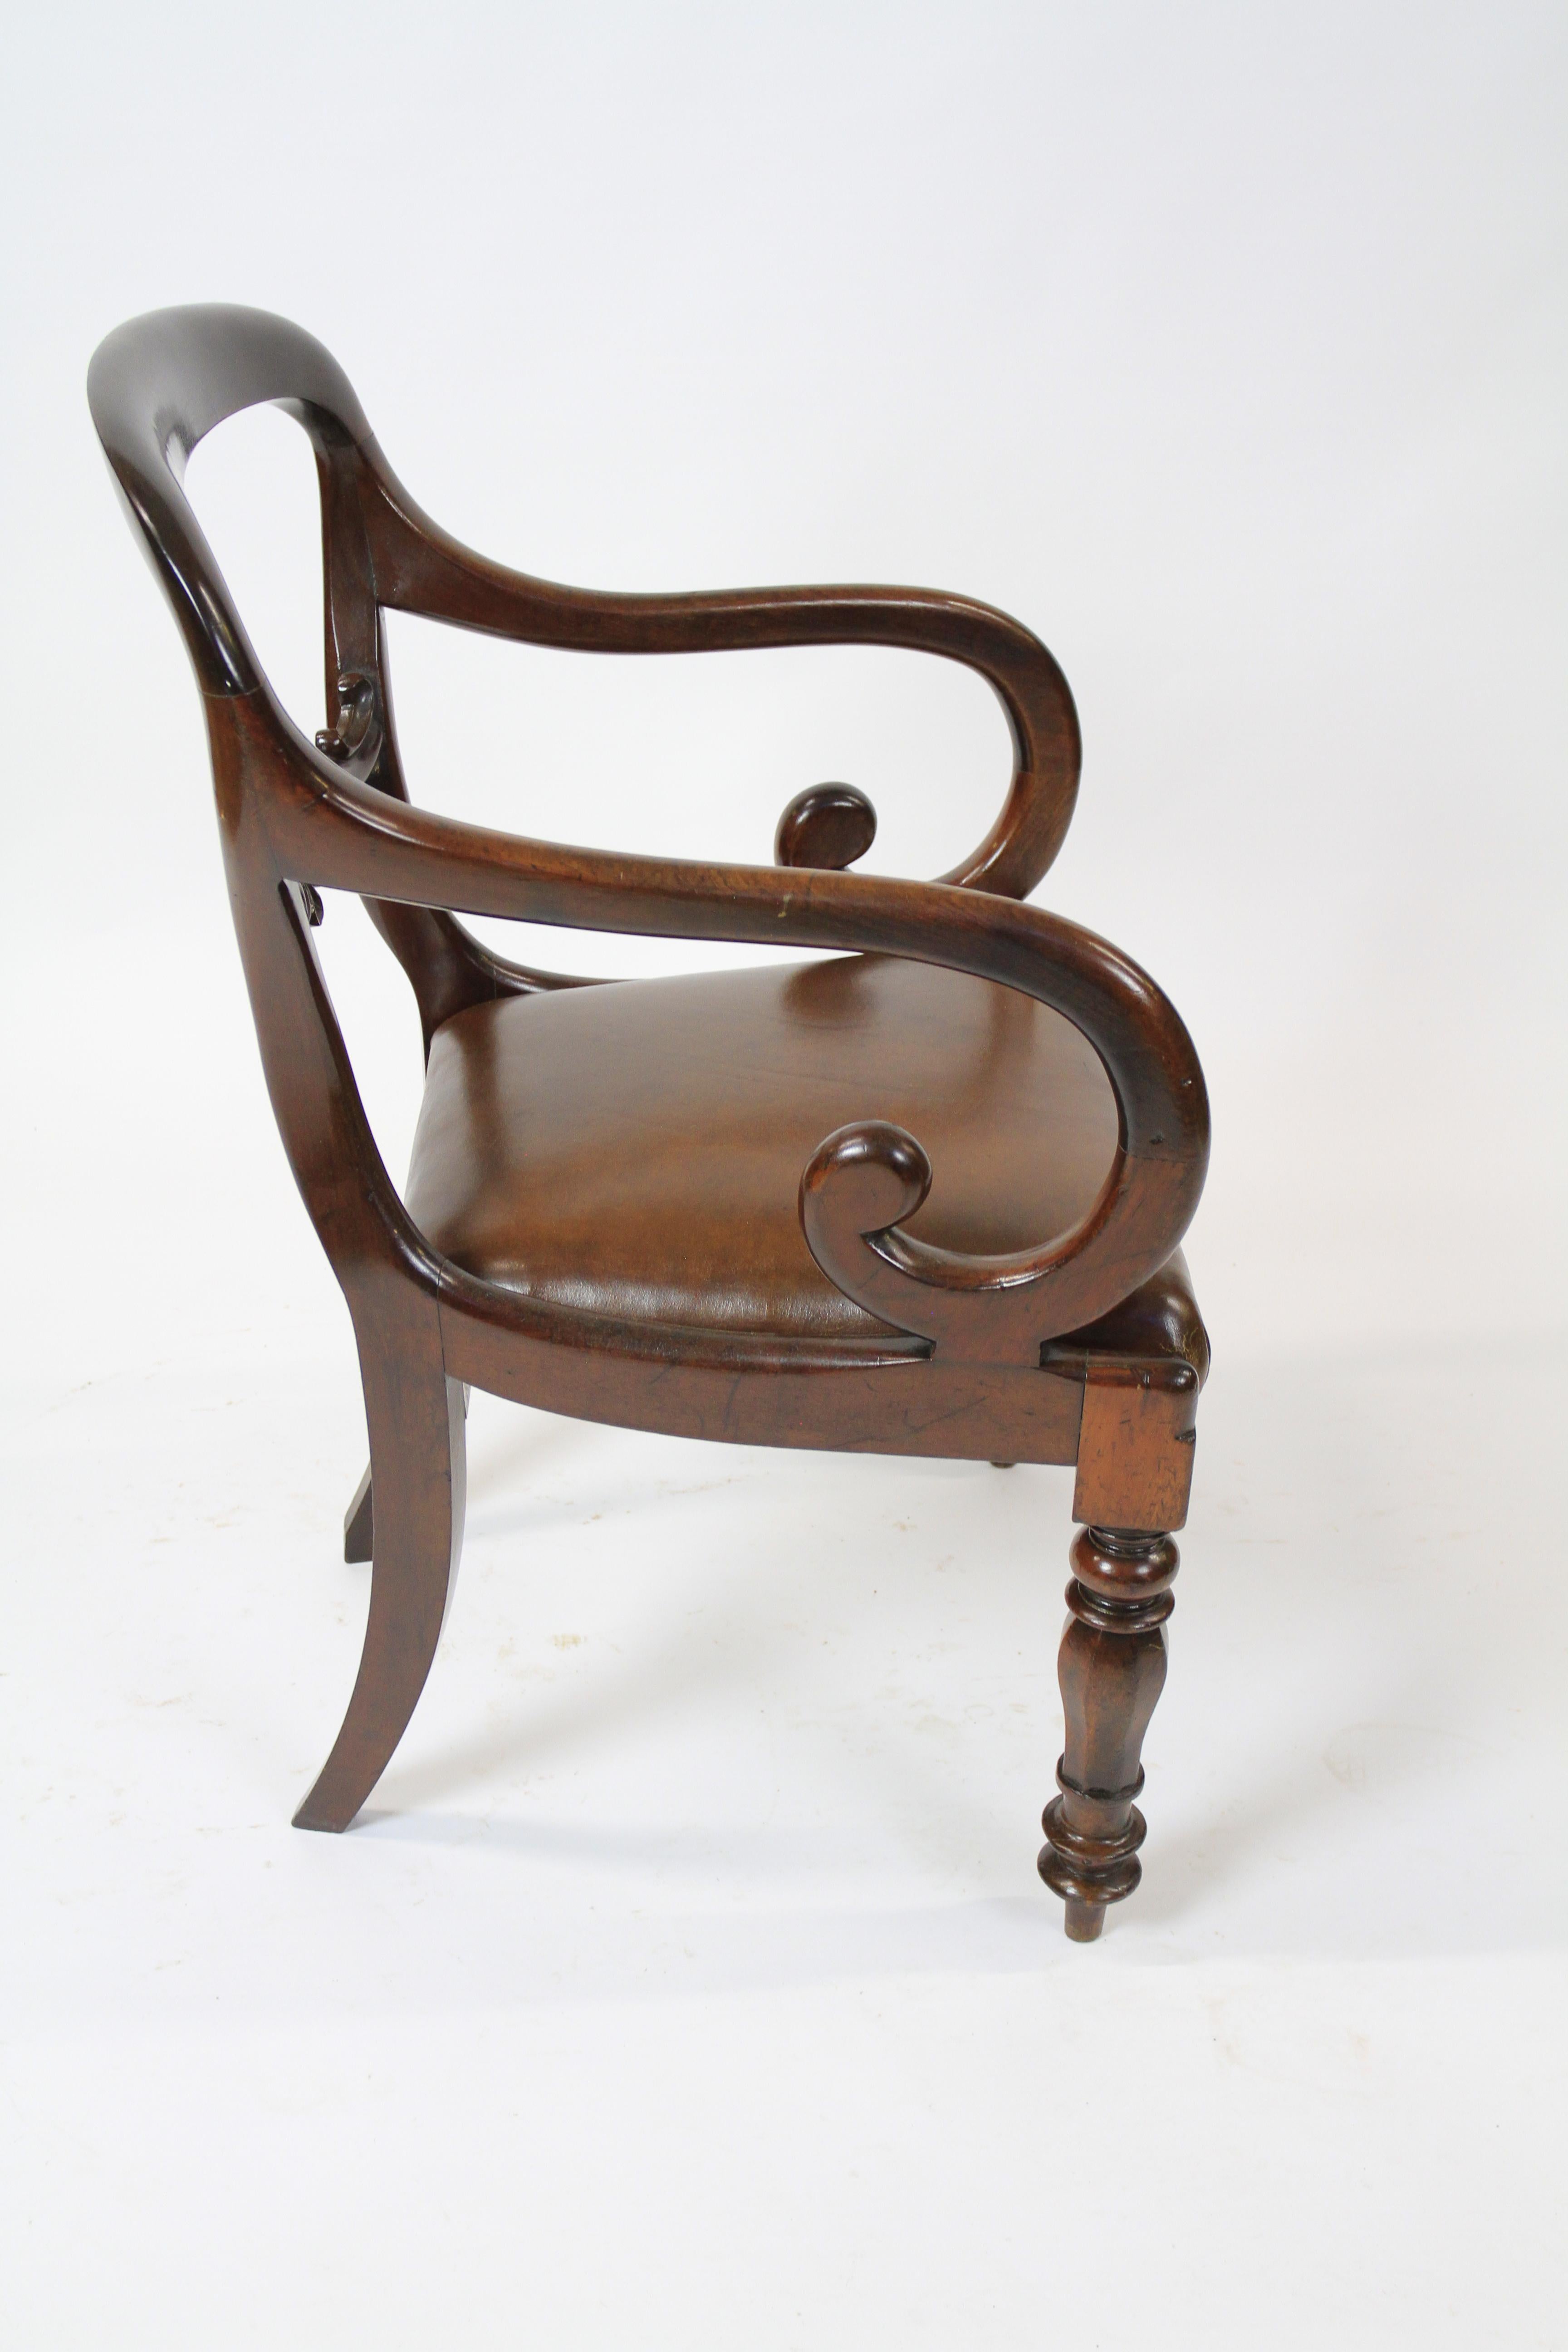 Early Victorian Mahogany & leather Desk Elbow chair
Balloon Shaped Back With carved back Splat
Scroll Open Elbows
Brown Leather Drop in seat. recently covered
Hexagonal & turned front legs,
Recently Polished
Seat Height:  44cm